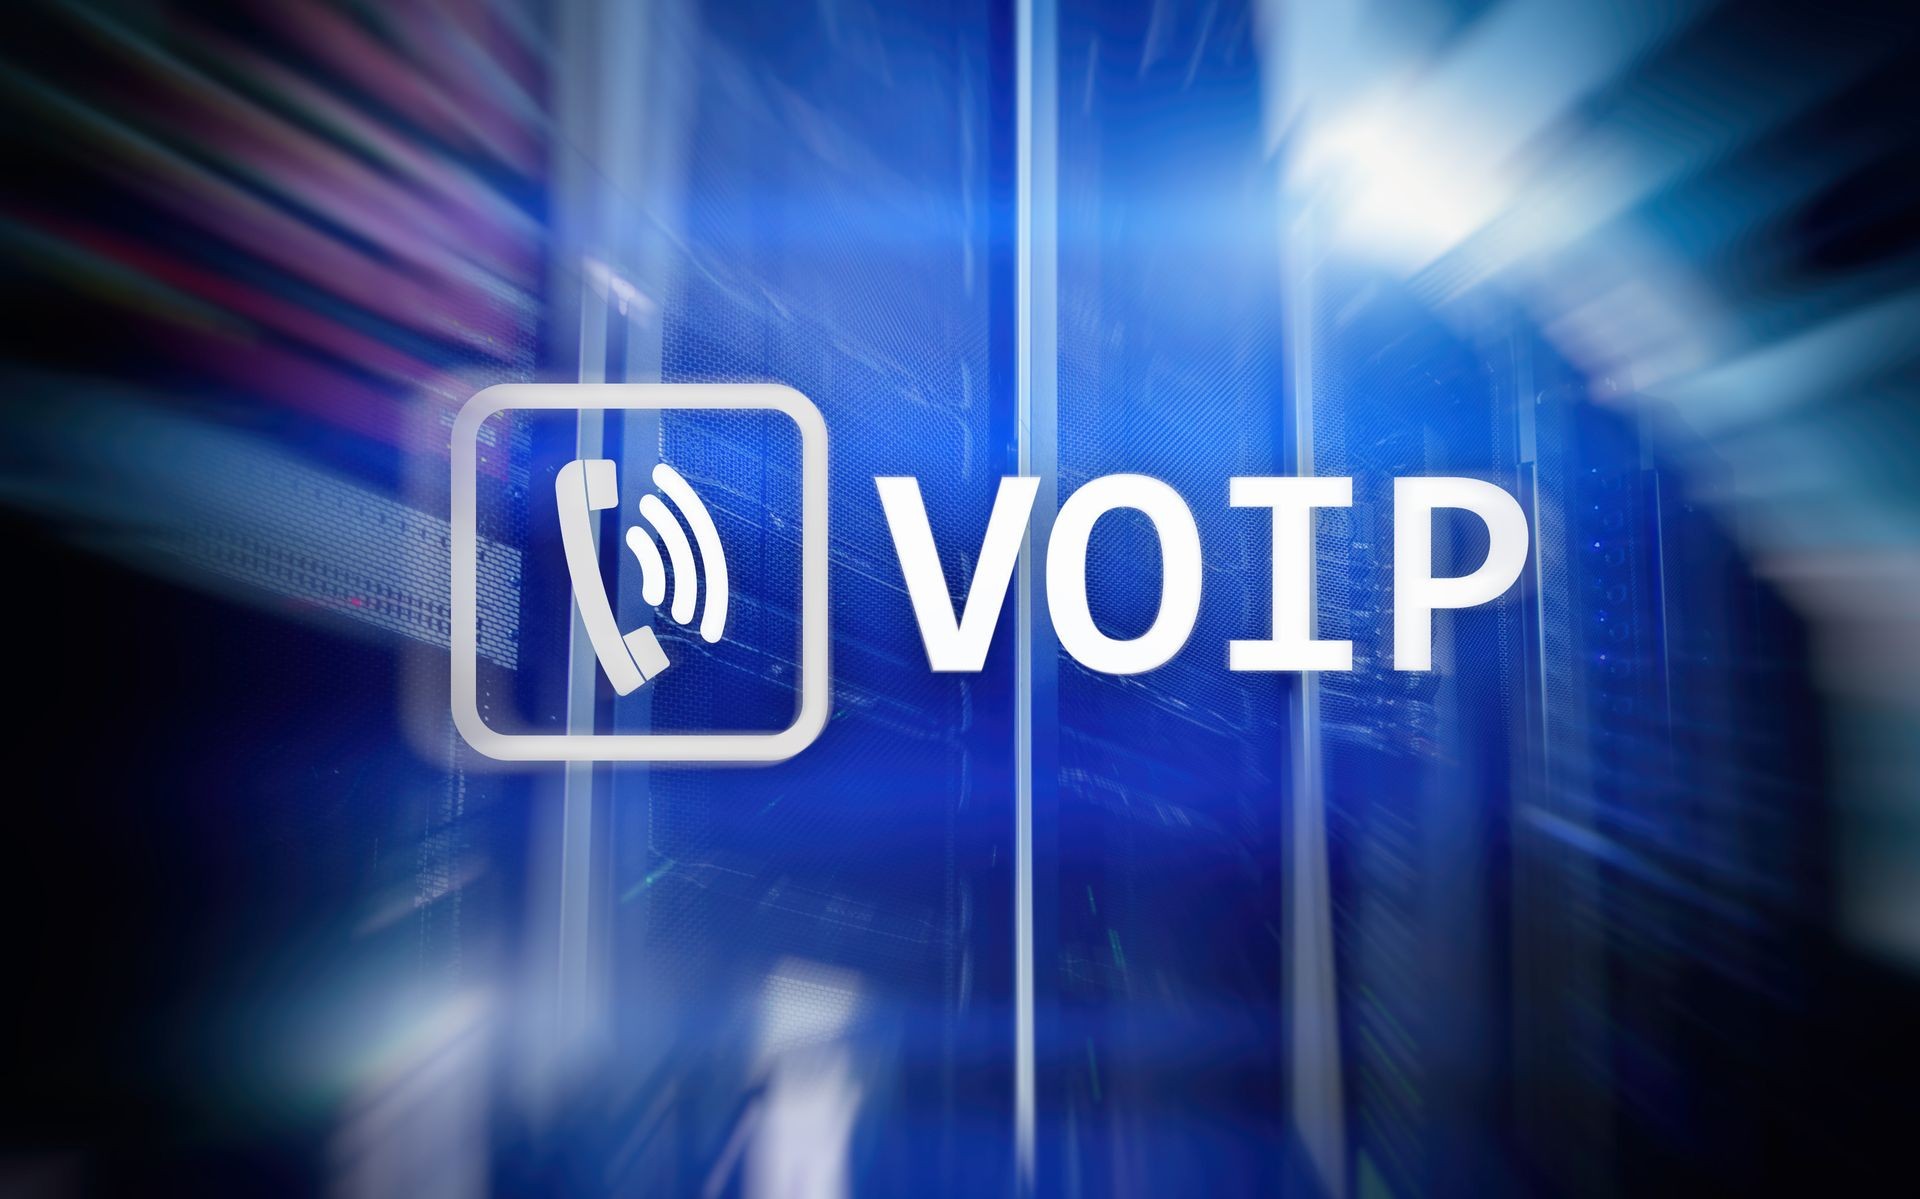 VOIP, Voice over Internet Protocol, technology that allows for speech communication via the Internet. Server room background.